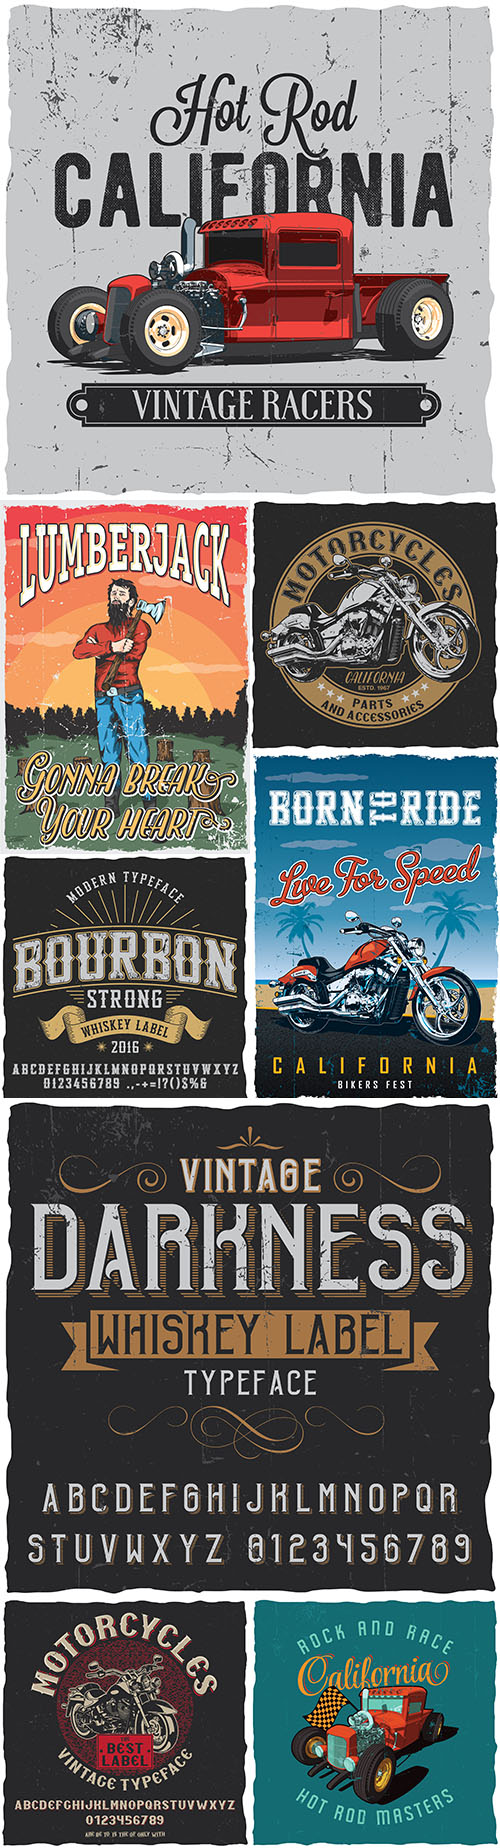 Vintage poster with details and accessories of motorcycles for T-shirts
